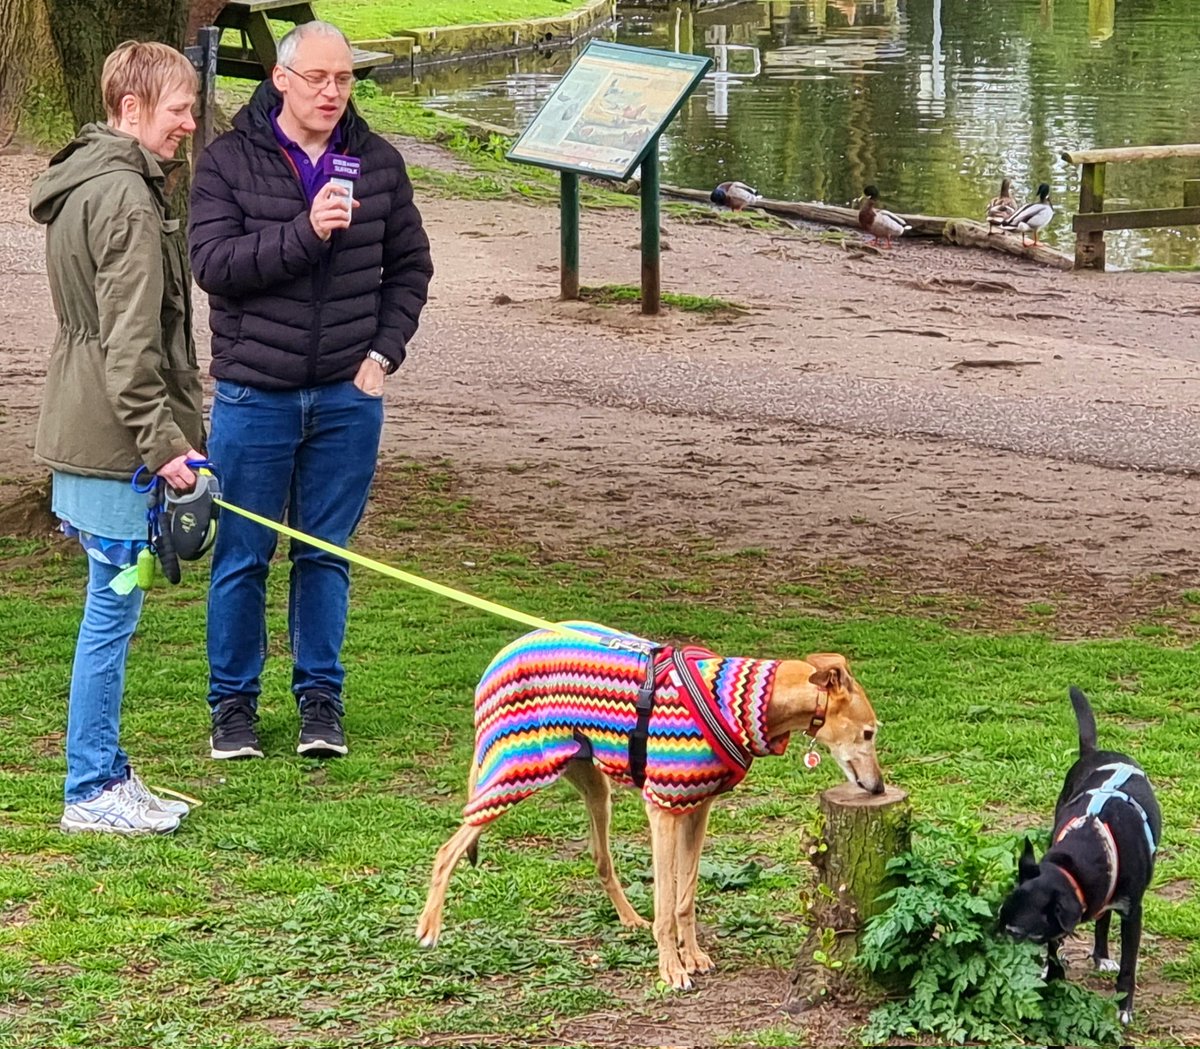 Good chat with Darren Rozier at #NeedhamLake for @BBCSuffolk Love Our Parks segment this morning. A favourite with early morning dog walkers, we also heard from an amateur wildlife photographer. A chance to unplug an @BikeEezy e-bike for a spin and plug the Duck & Teapot café.